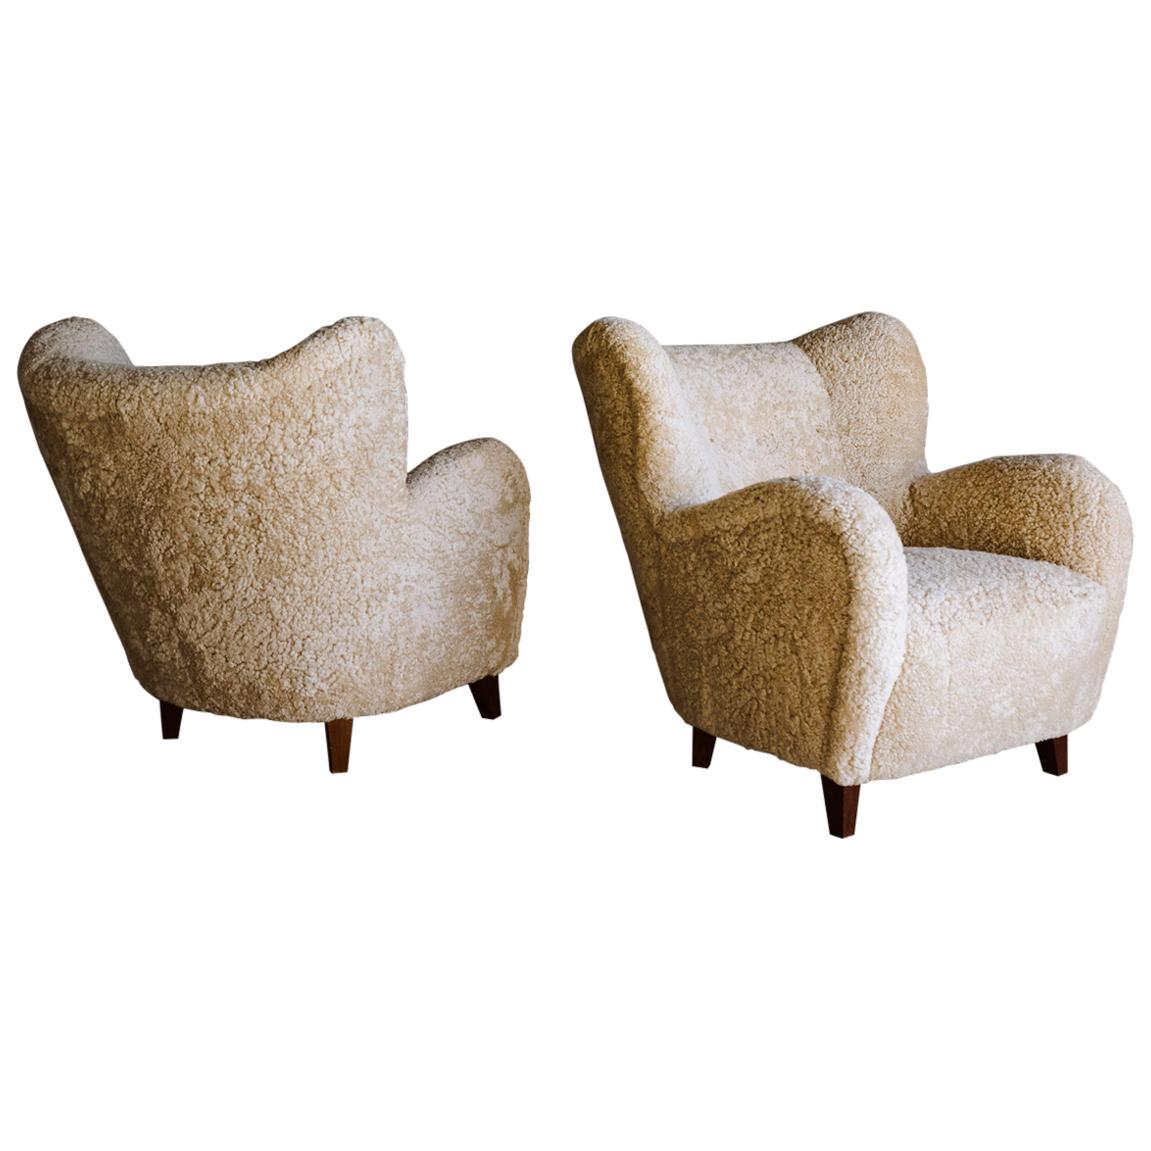 Vintage Pair of Sheepskin Lounge Chairs from Finland, circa 1950